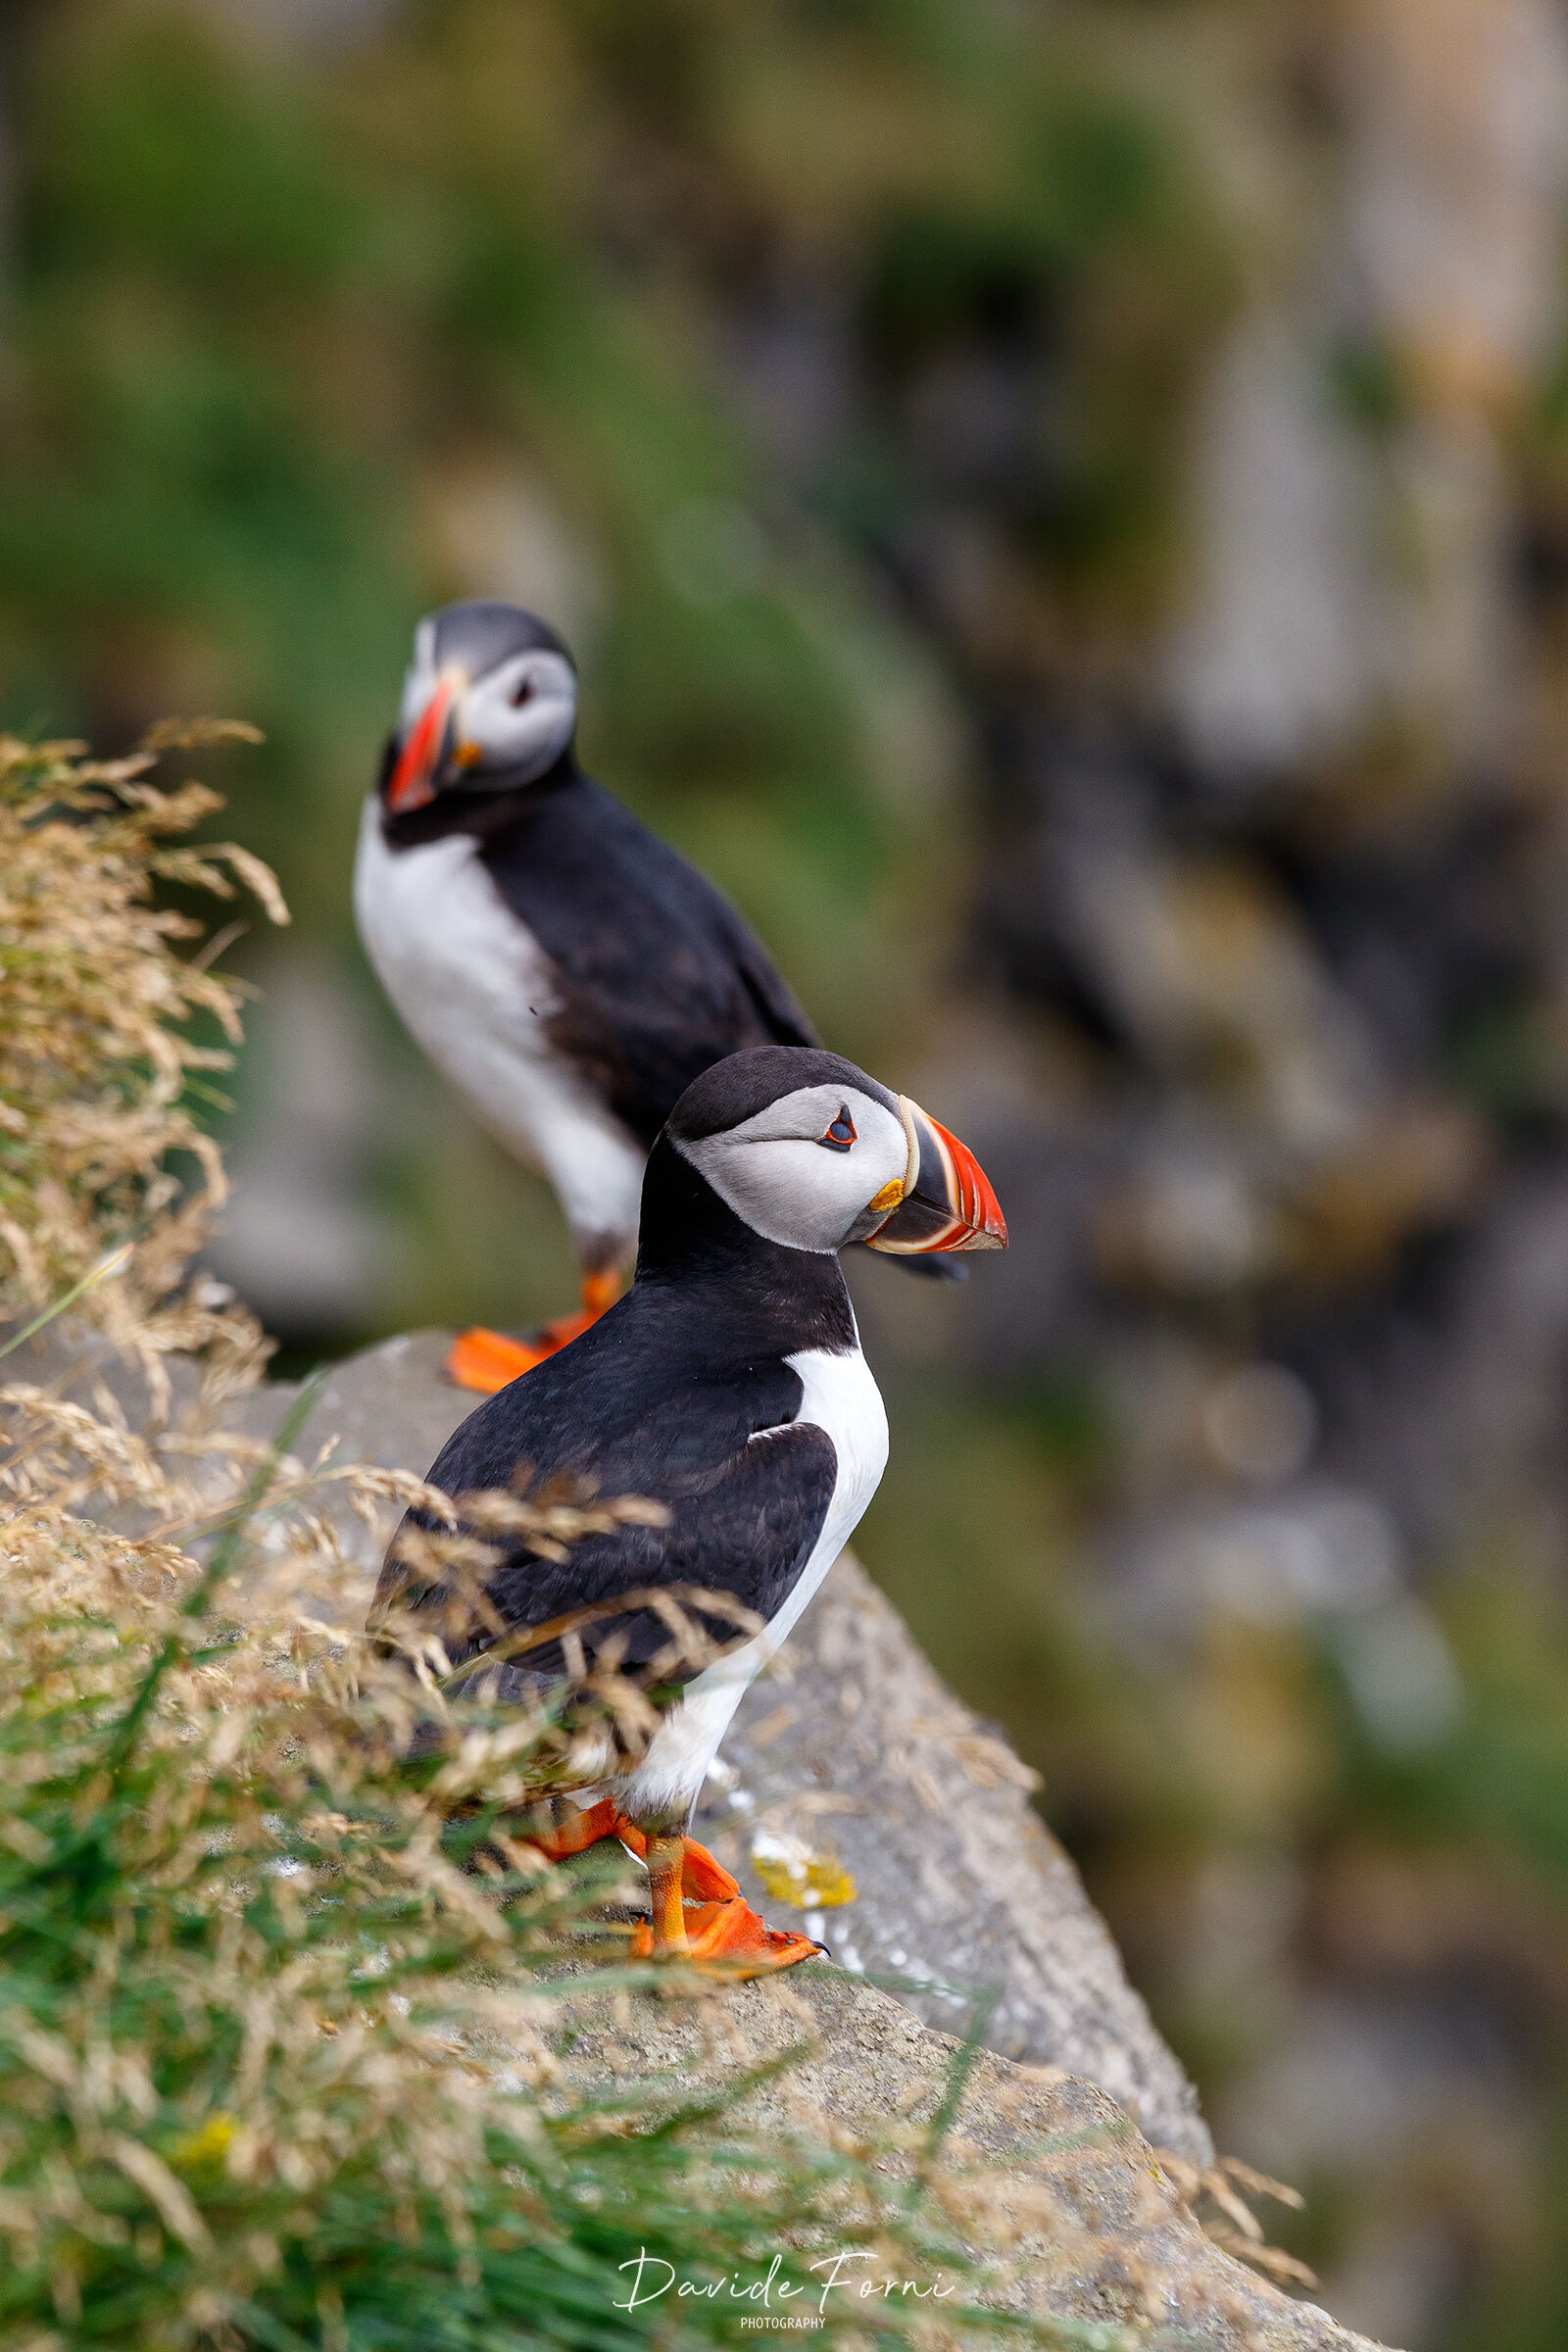 At last.... the Puffin!...